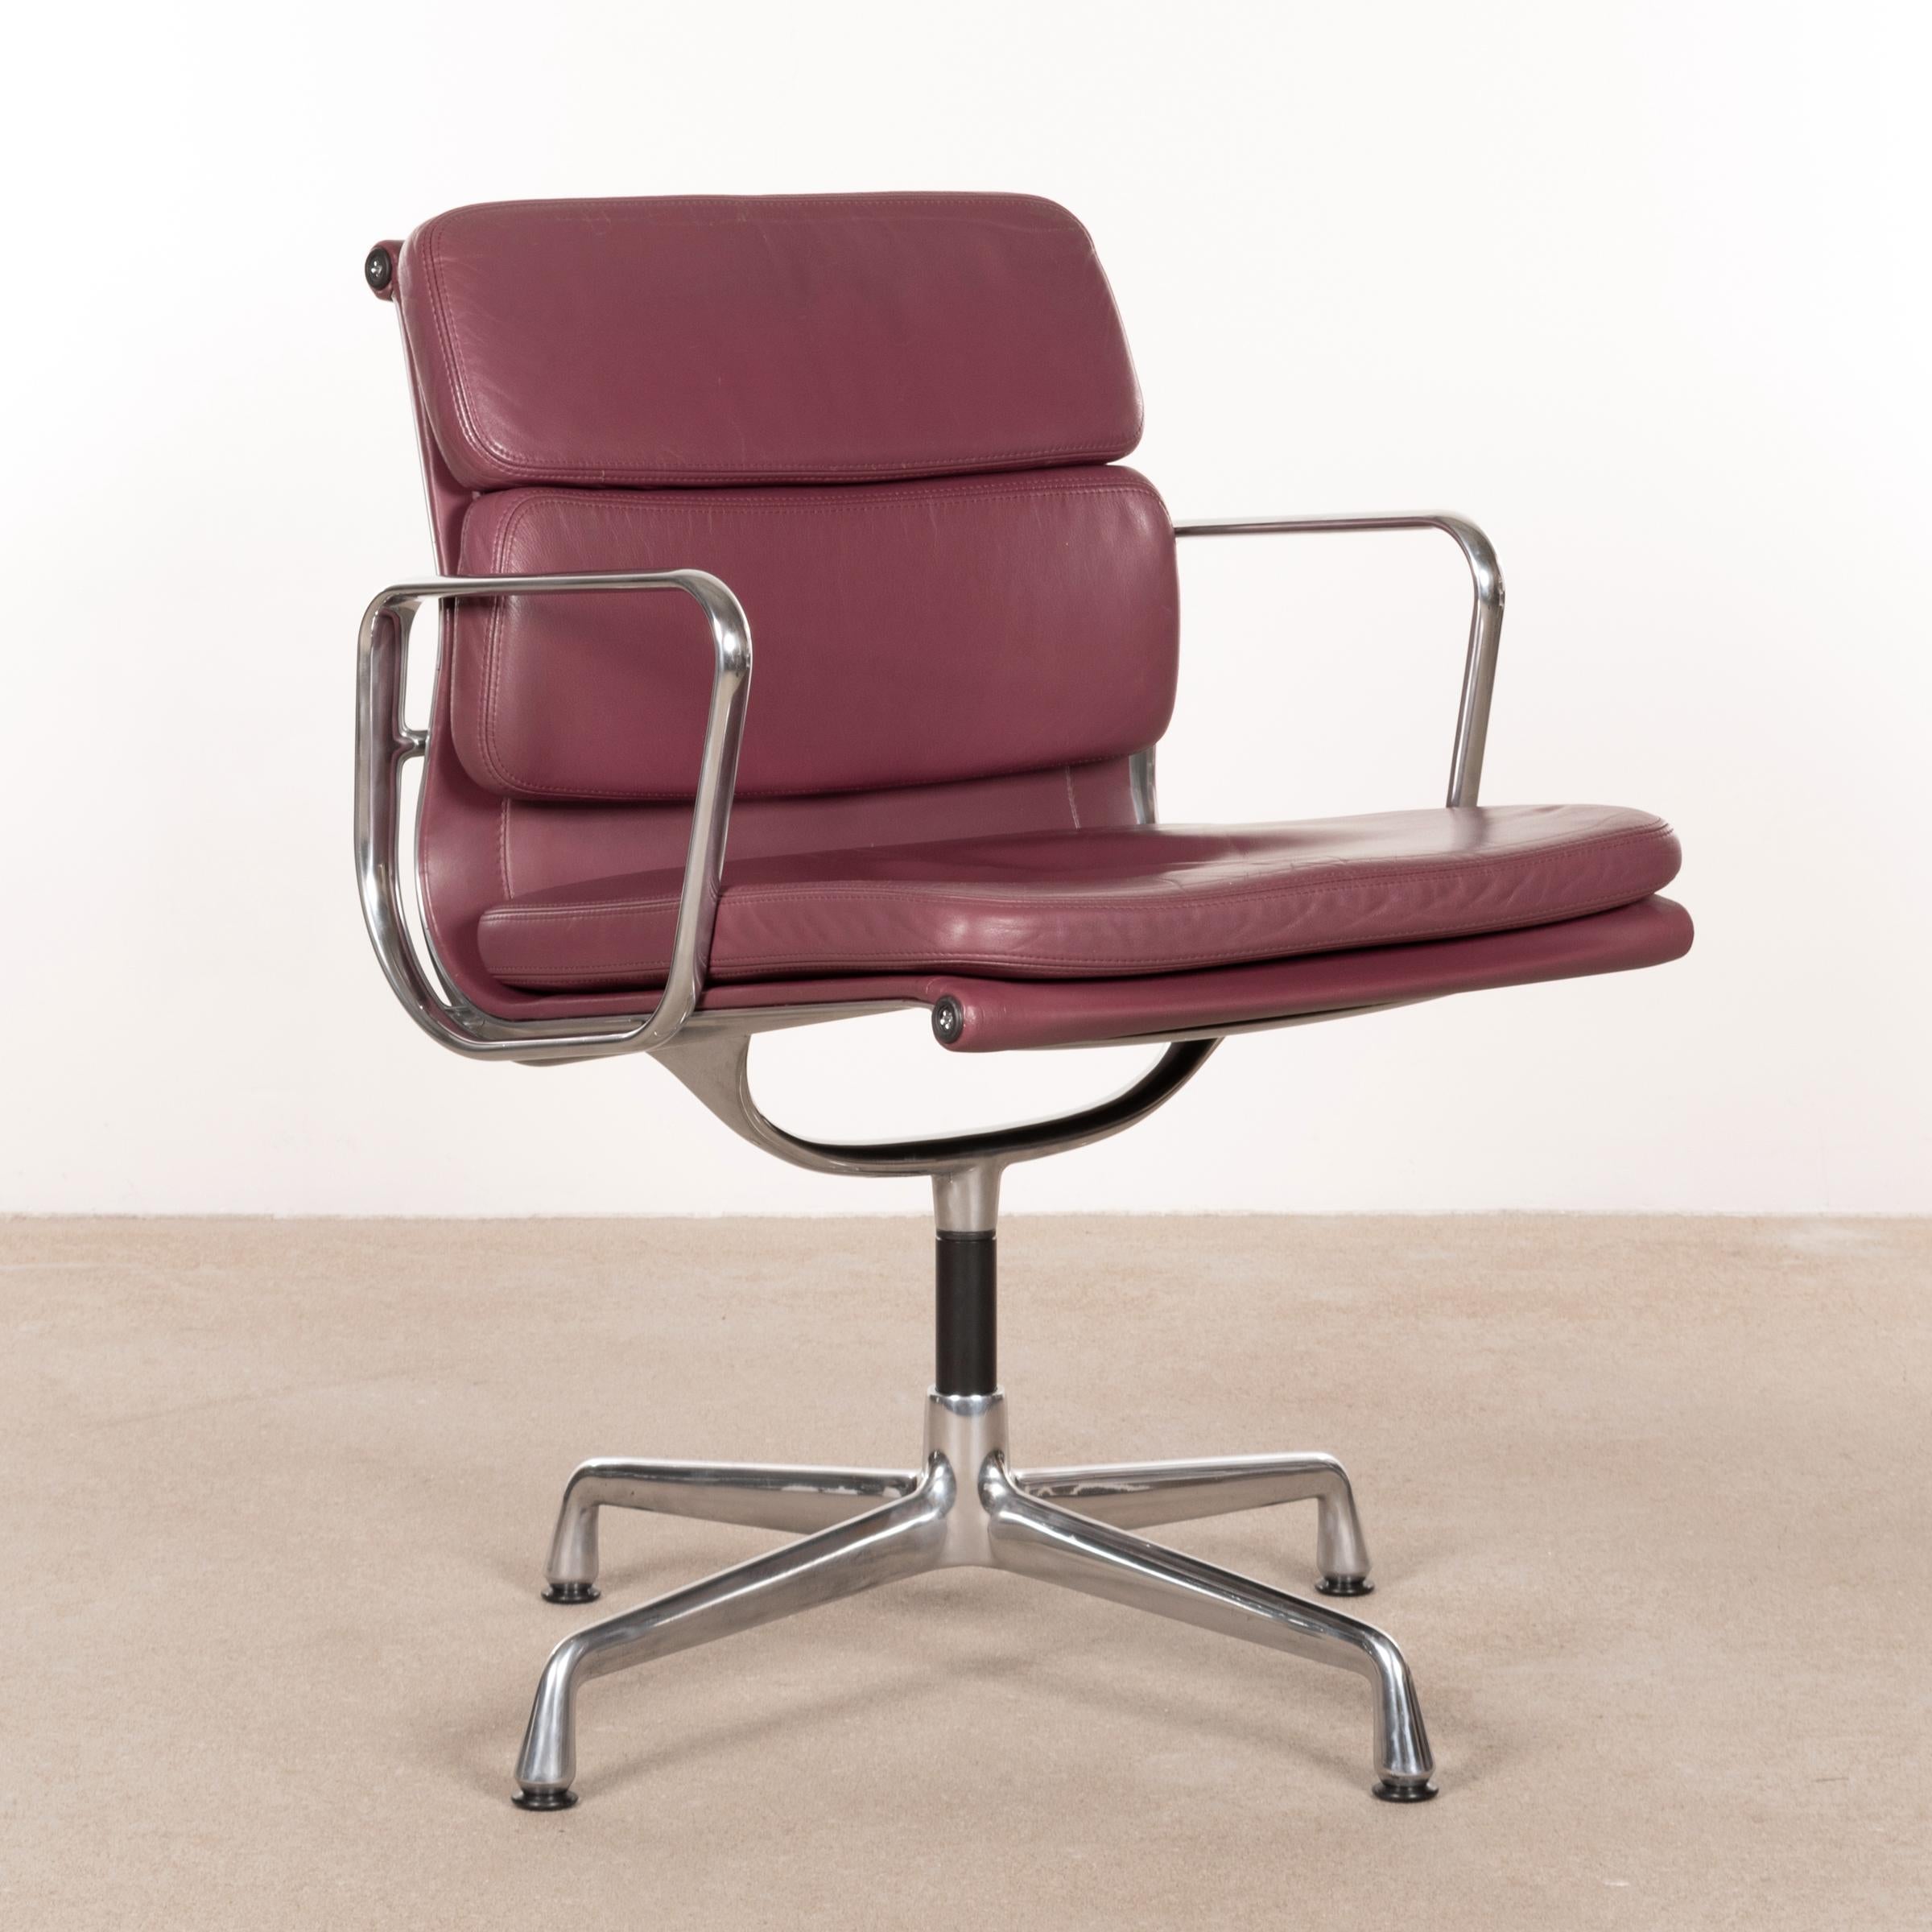 Mid-20th Century Charles & Ray Eames EA208 Soft Pad Chairs in Aubergine / Purple Leather by Vitra